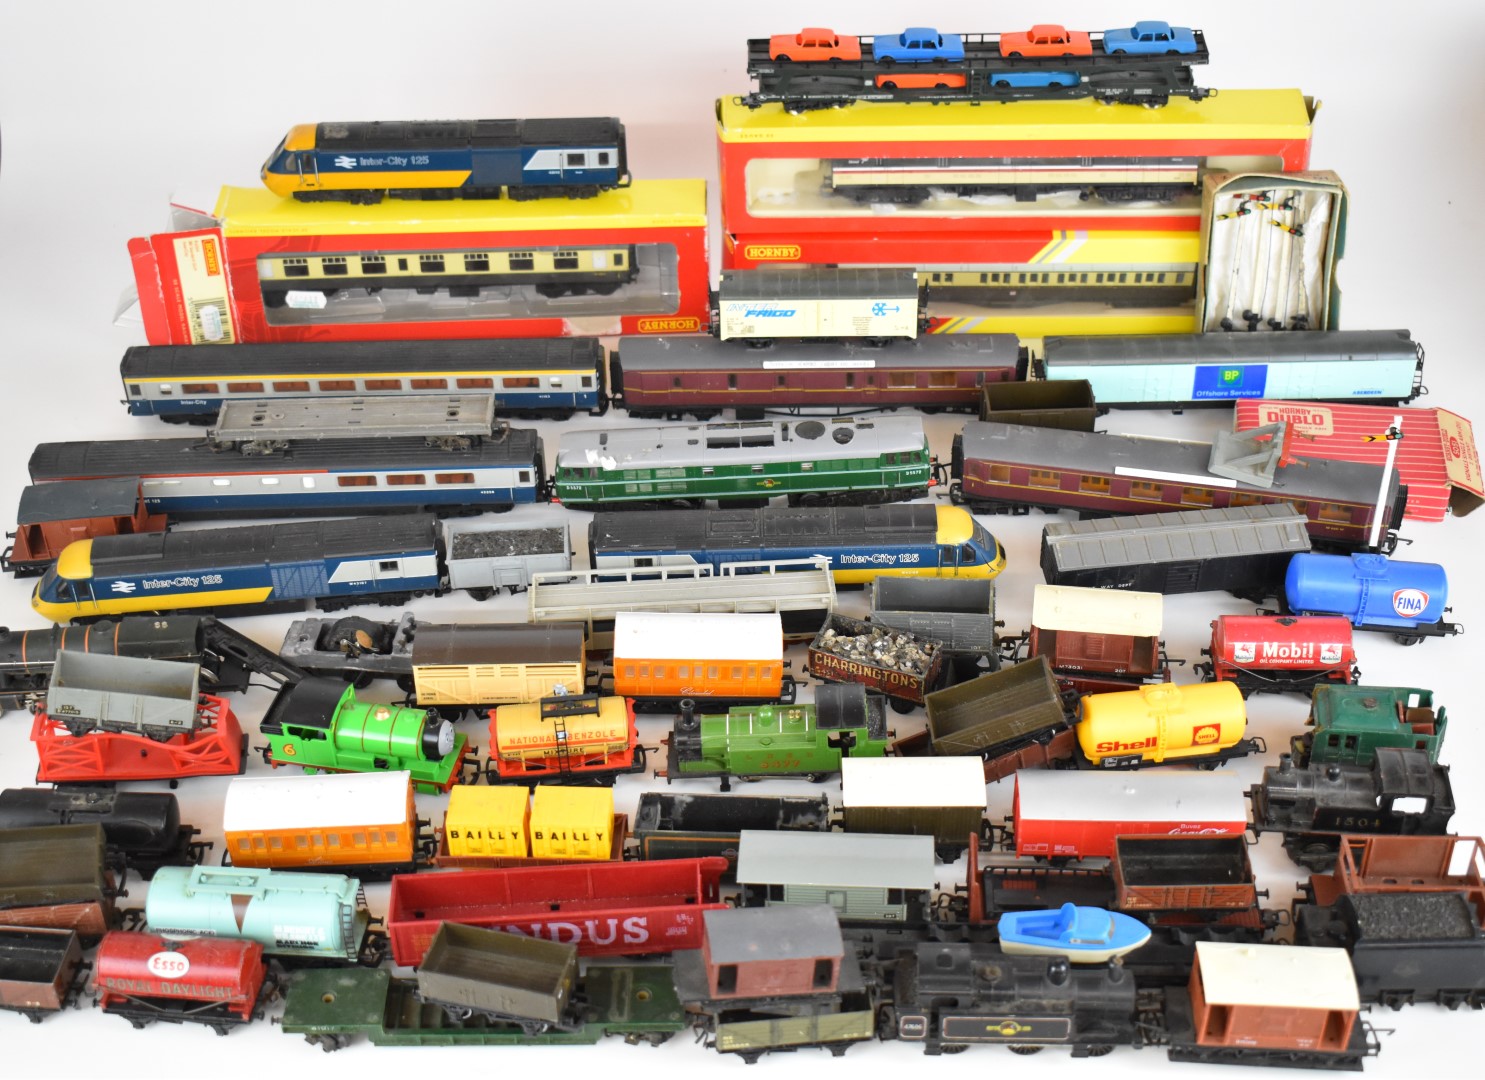 A collection of 00 gauge model railway locomotives, passenger carriages and goods wagons to